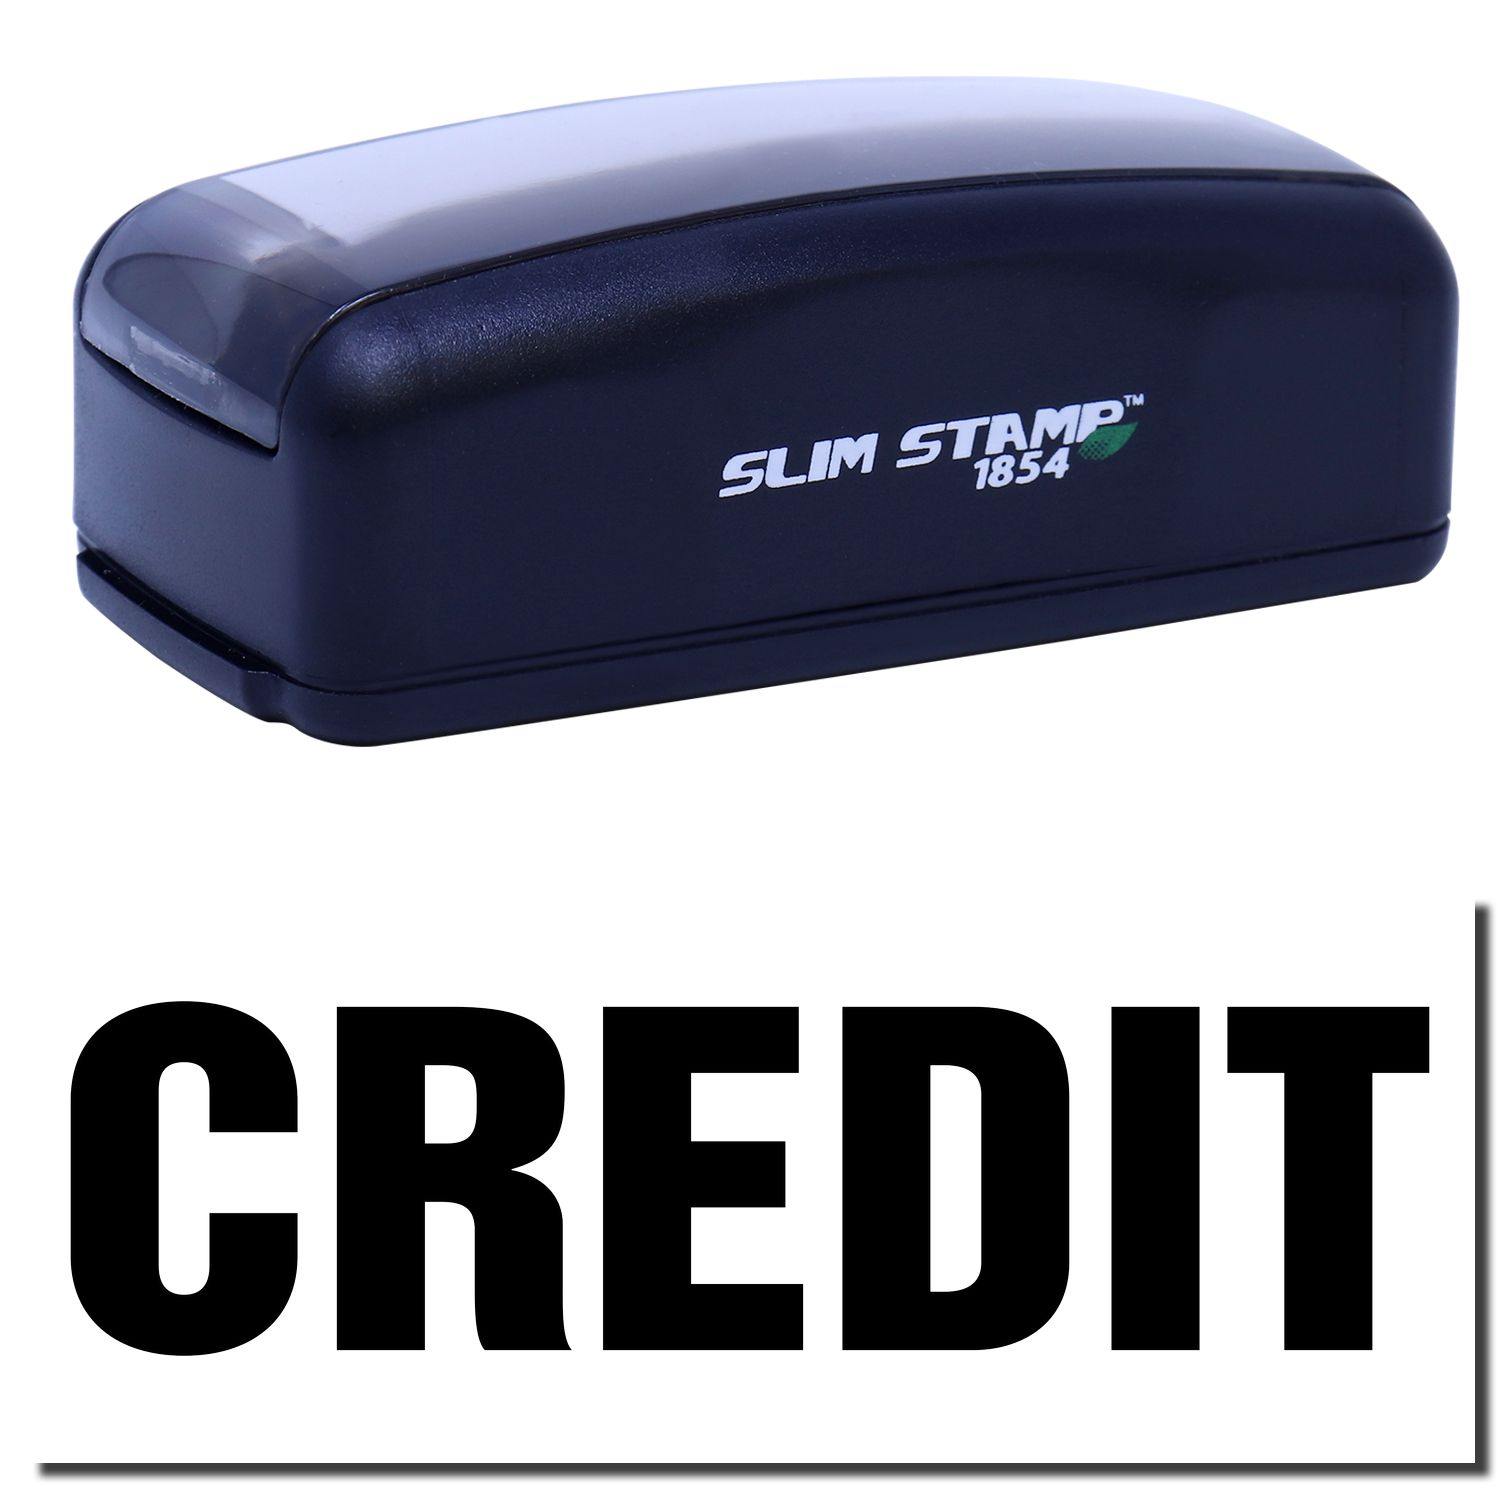 A stock office pre-inked stamp with a stamped image showing how the text "CREDIT" in a large font is displayed after stamping.